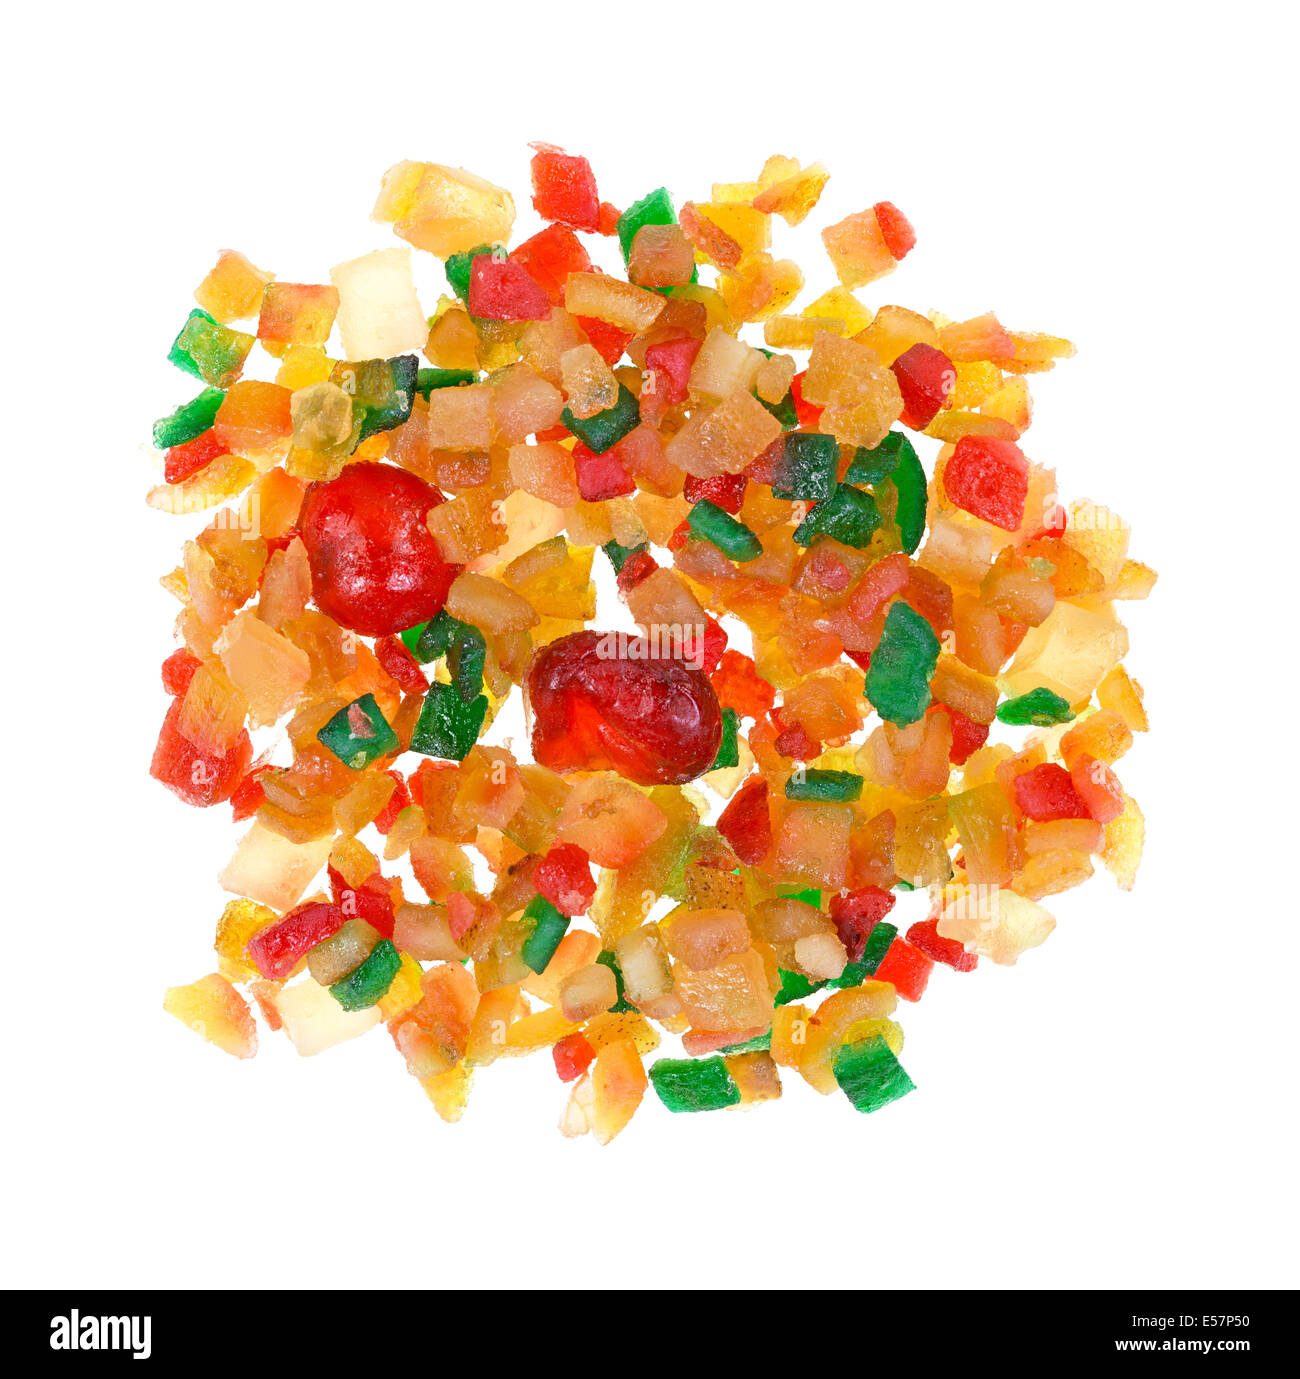 Top view of a portion of fruit and peel mix used for holiday fruitcakes. Stock Photo